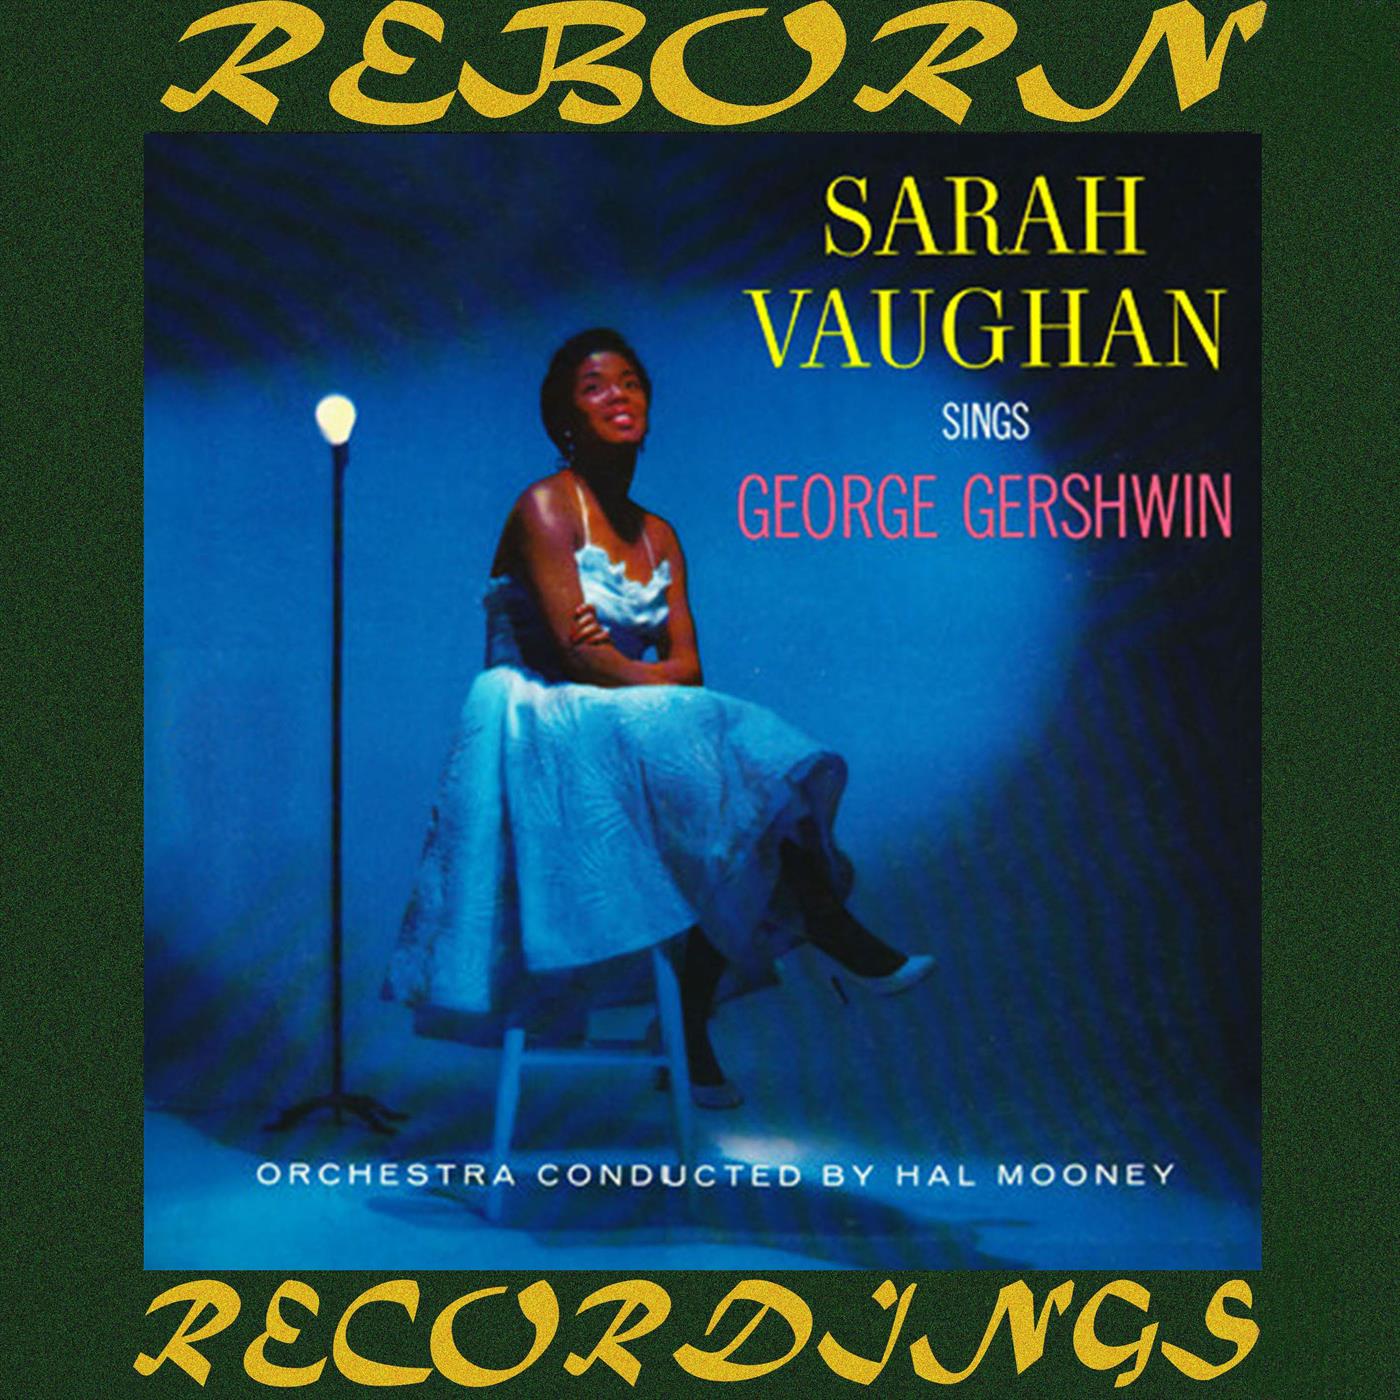 Sarah Vaughan Sings George Gershwin, The Complete Sessions (HD Remastered)